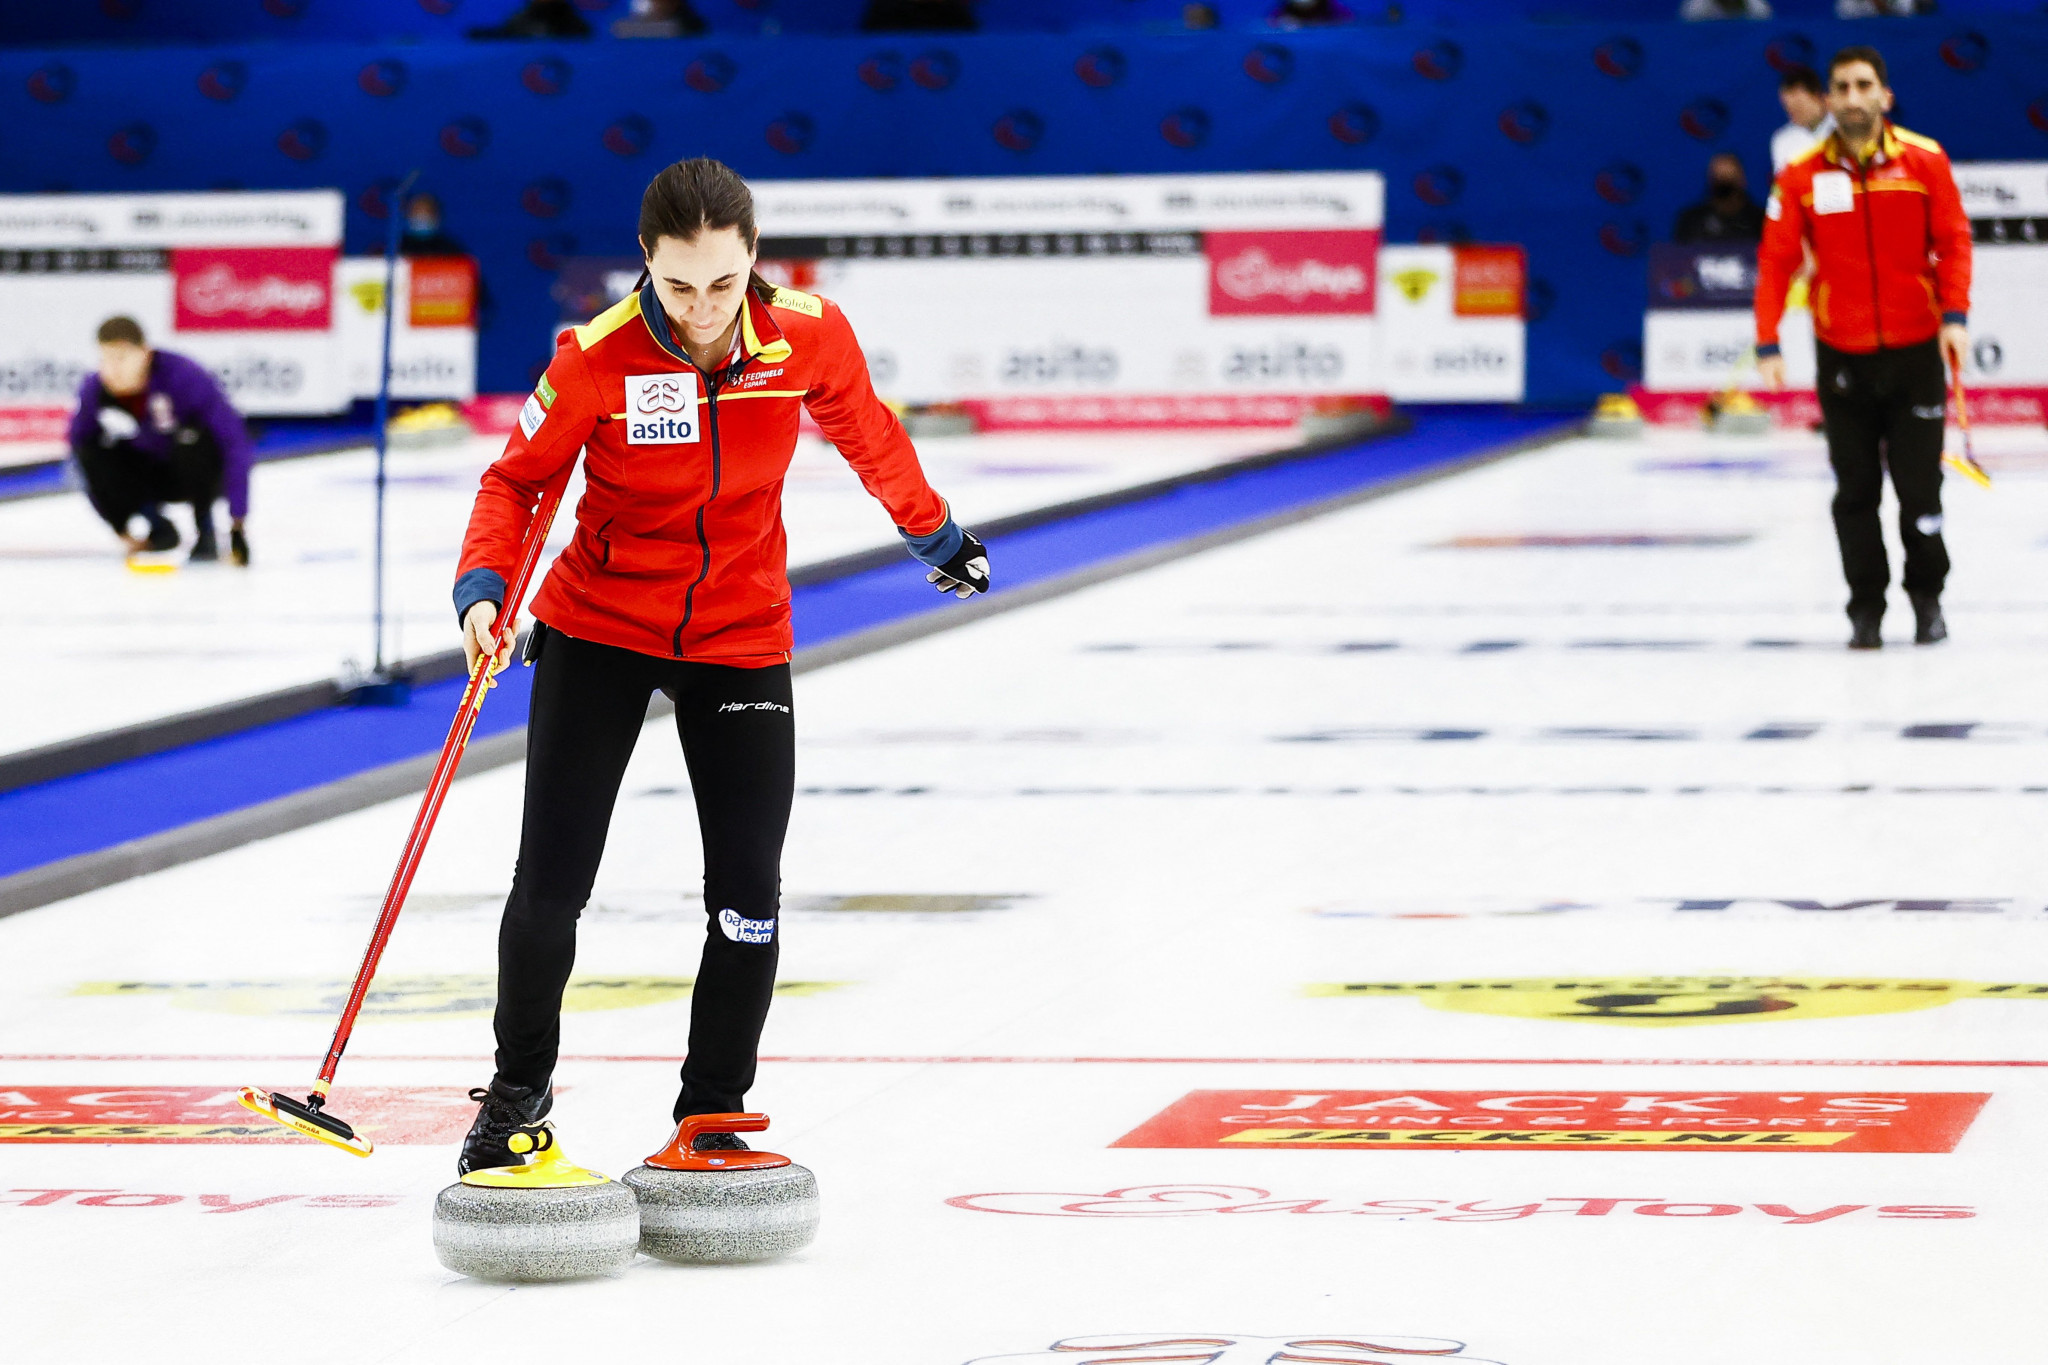 Spain qualified for the elimination stages at the World Mixed Curling Championship ©Getty Images